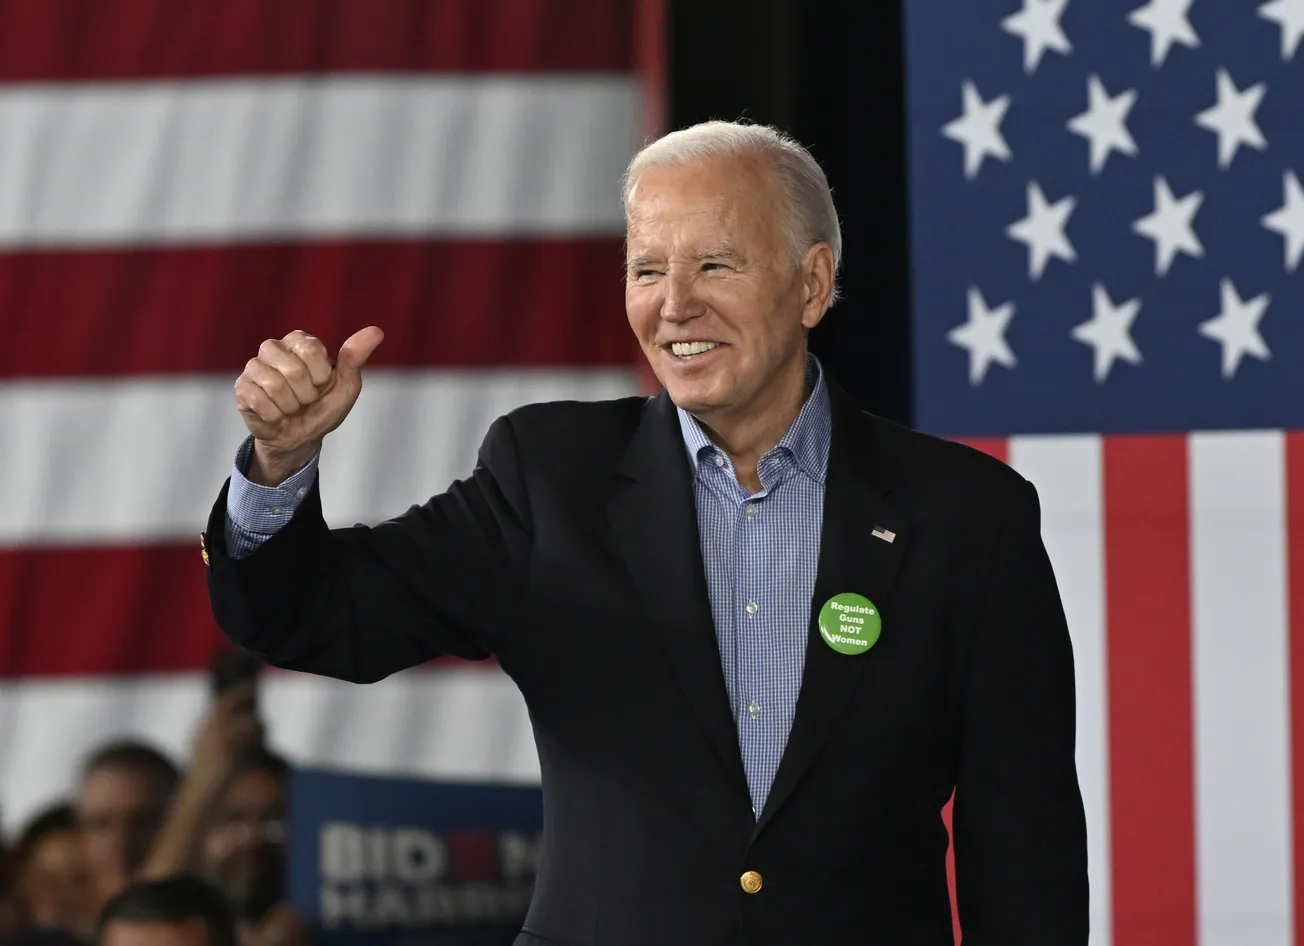 Why Is Biden Running Again? Voters Cite Everything From Power To Principles - And Keeping Hunter Out Of Trouble, A Daily Mail Poll Shows